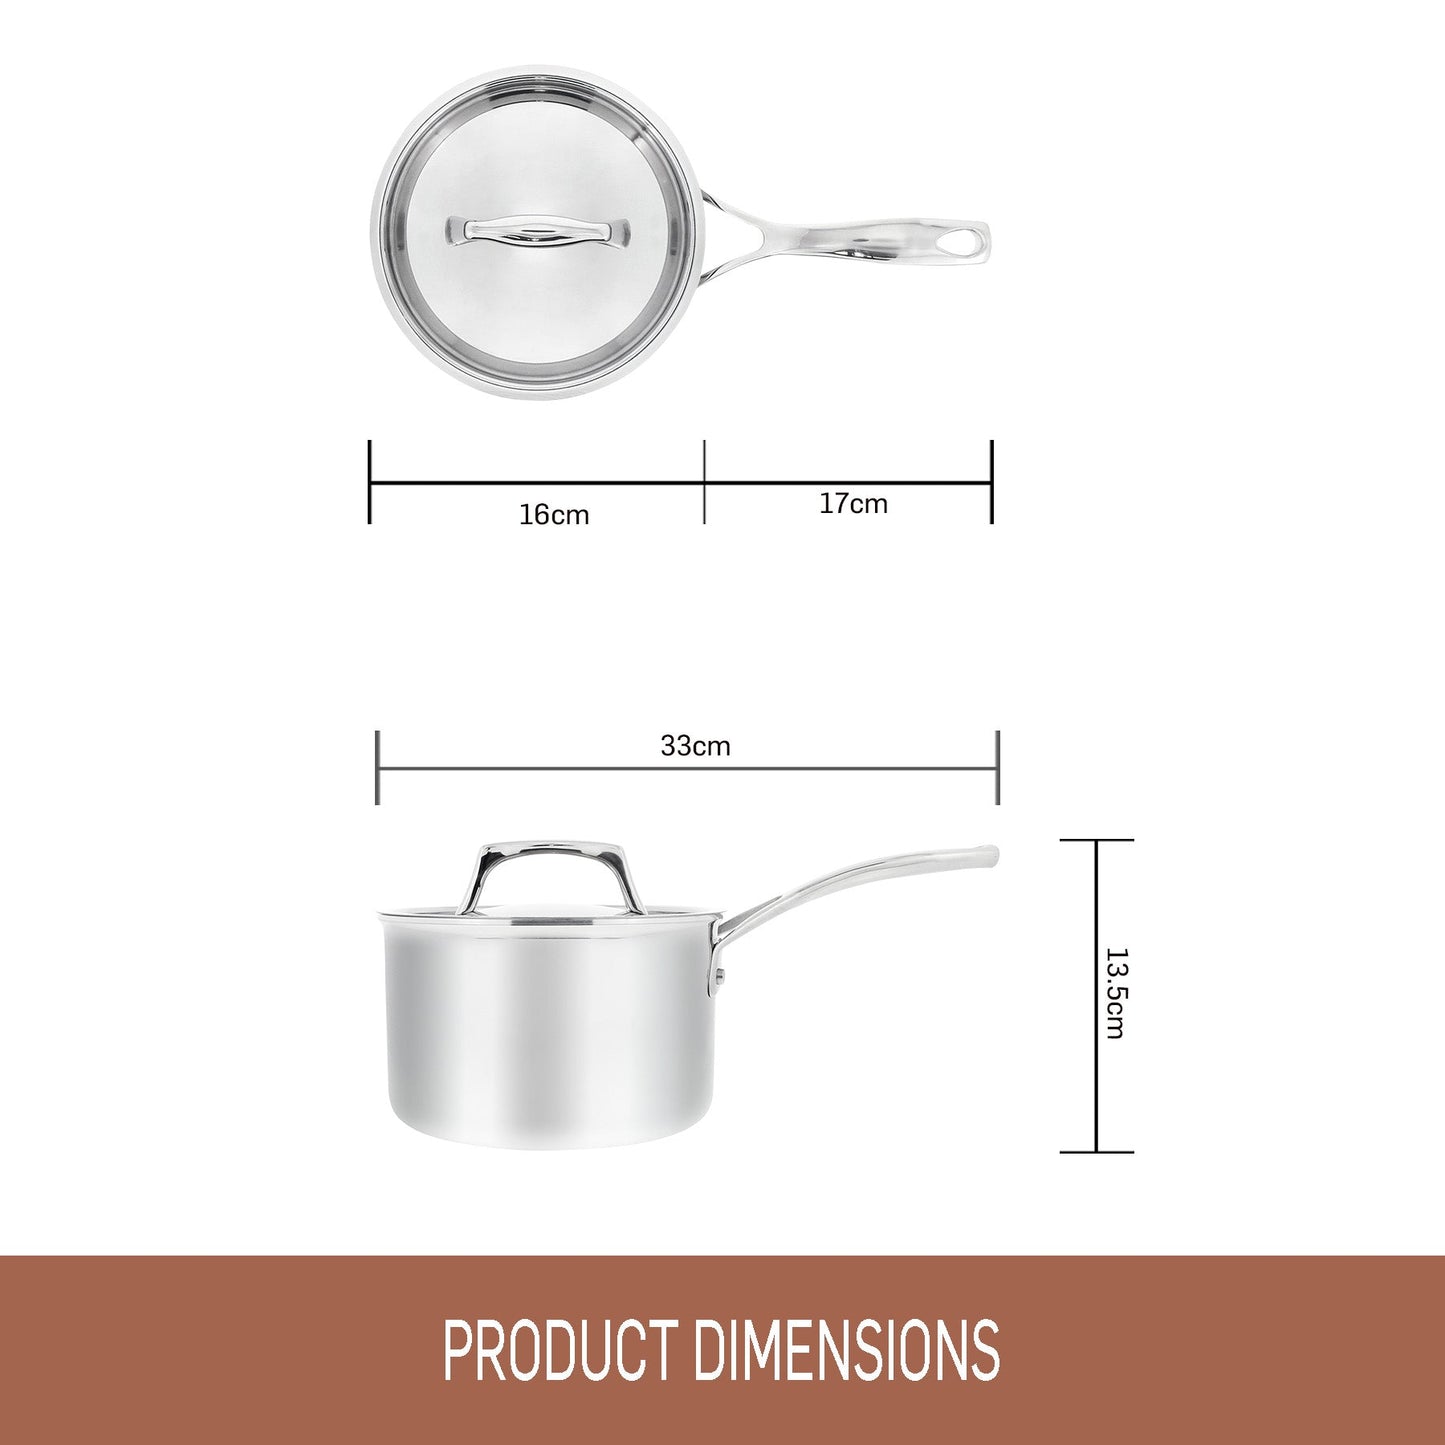 Essteele Per Sempre Clad Stainless Steel Induction Covered Saucepan 16cm/1.8L